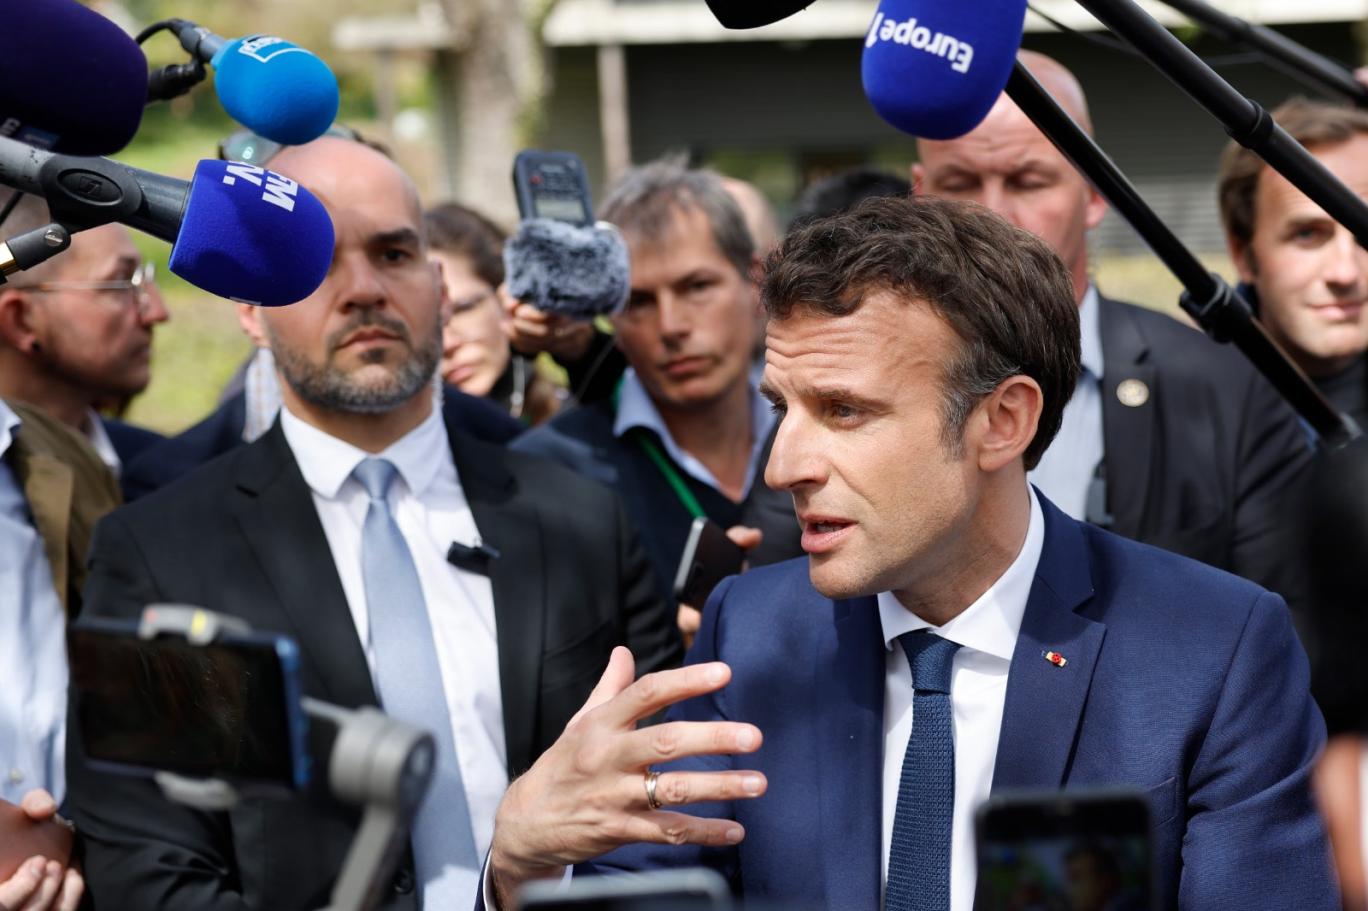 Macron on Trump: "I accept the leaders the people put in front of me"